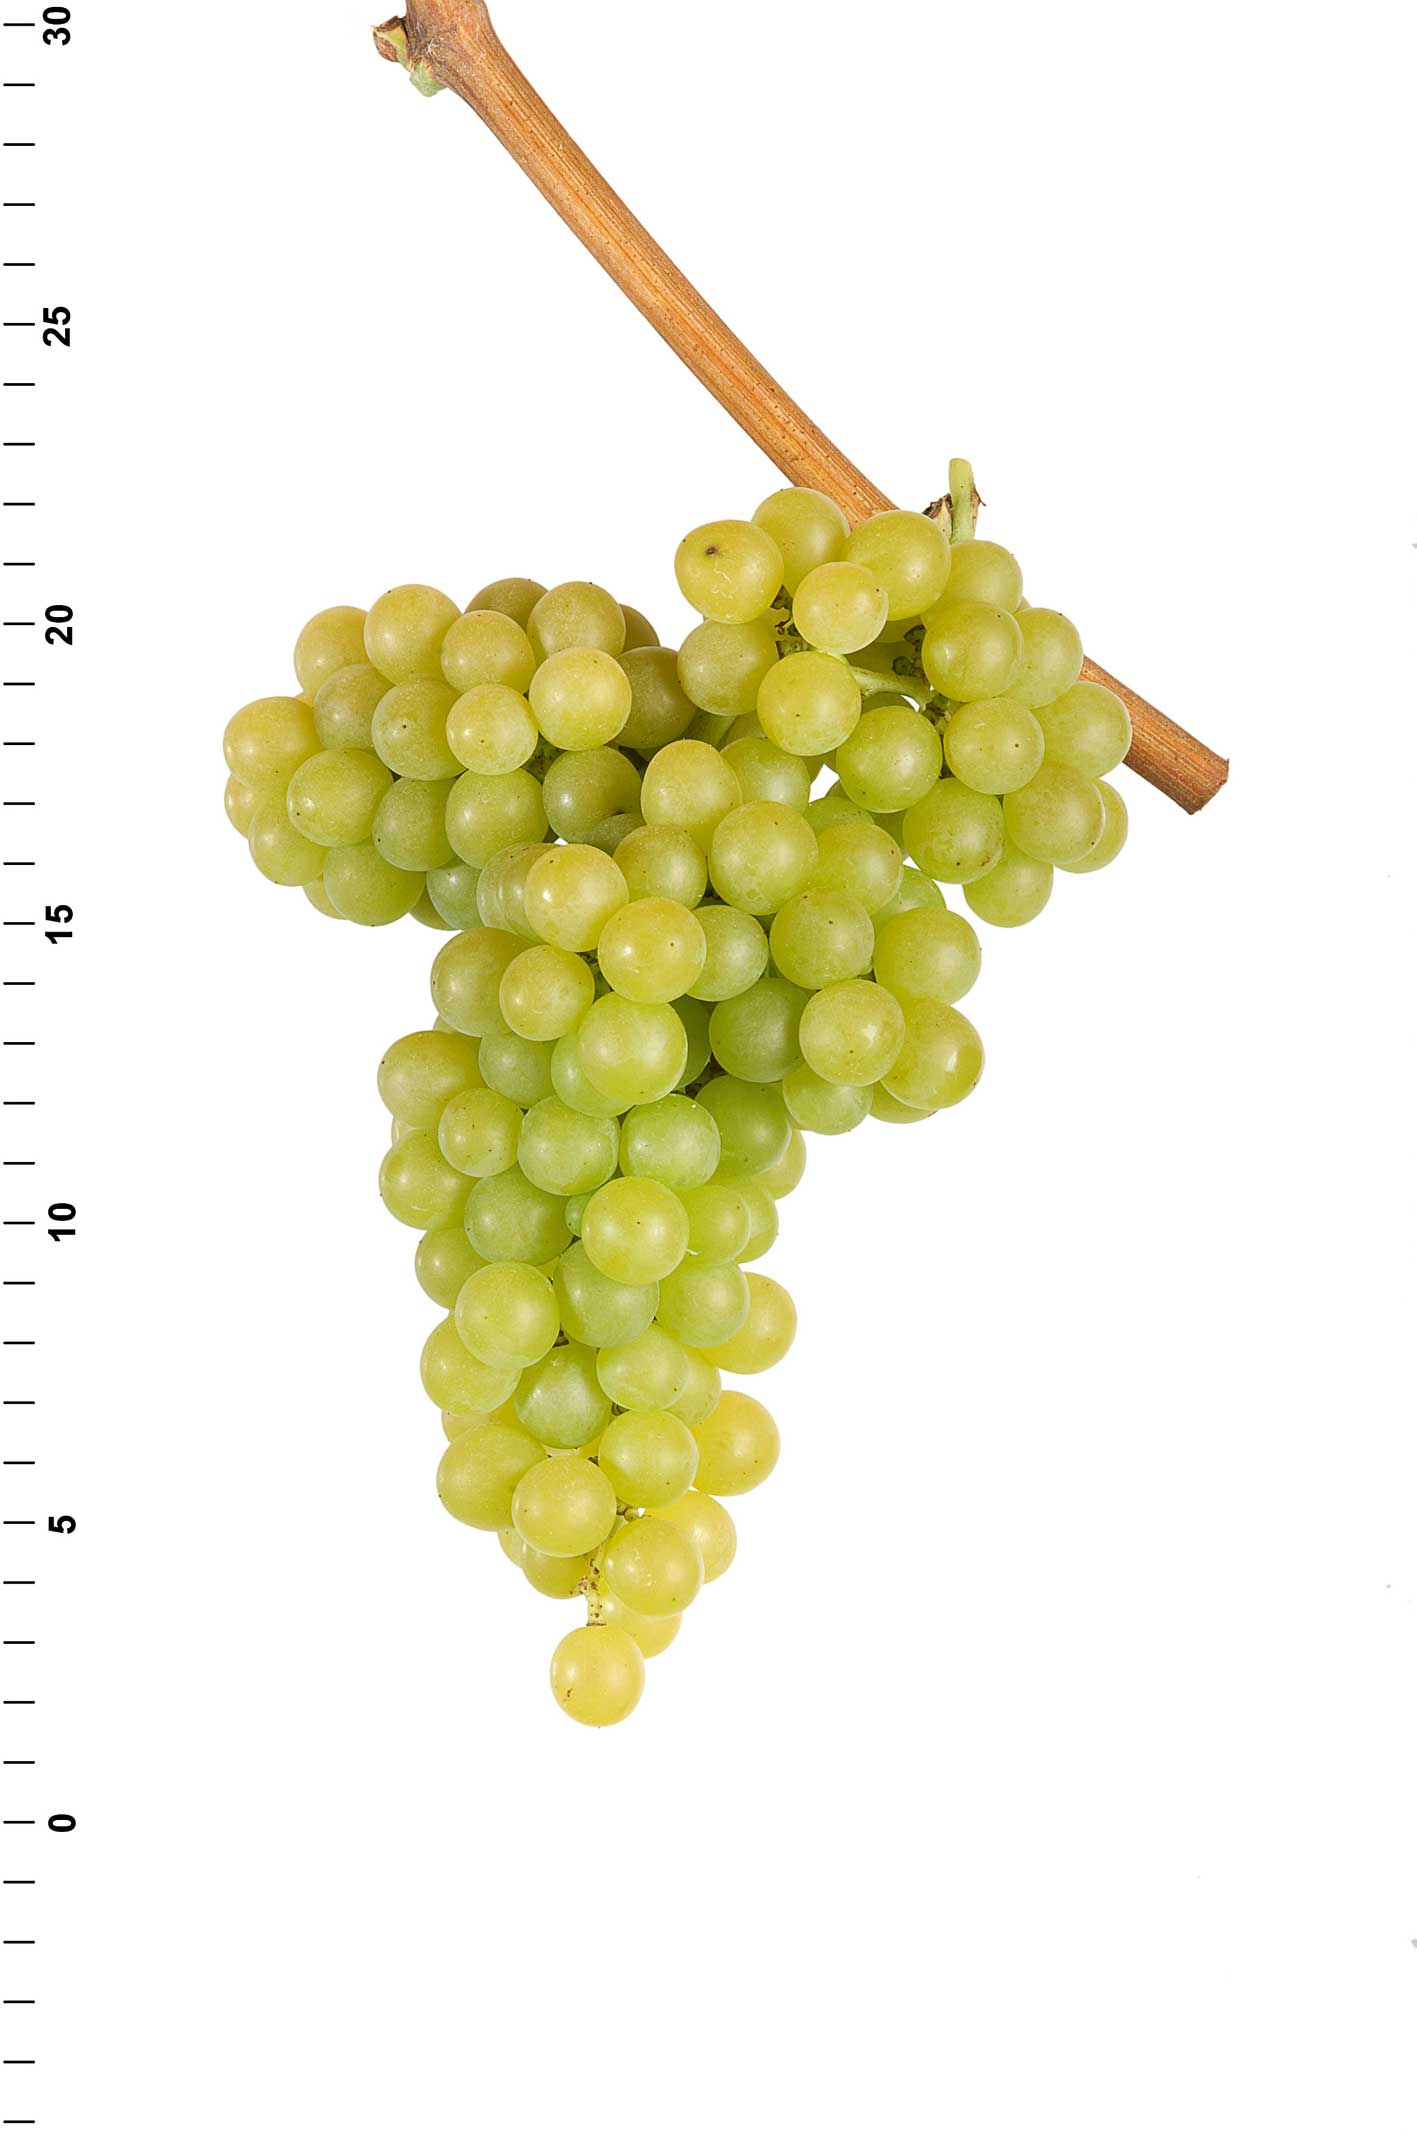 Distinction and valorisation of Muscat grapes in the Valais region